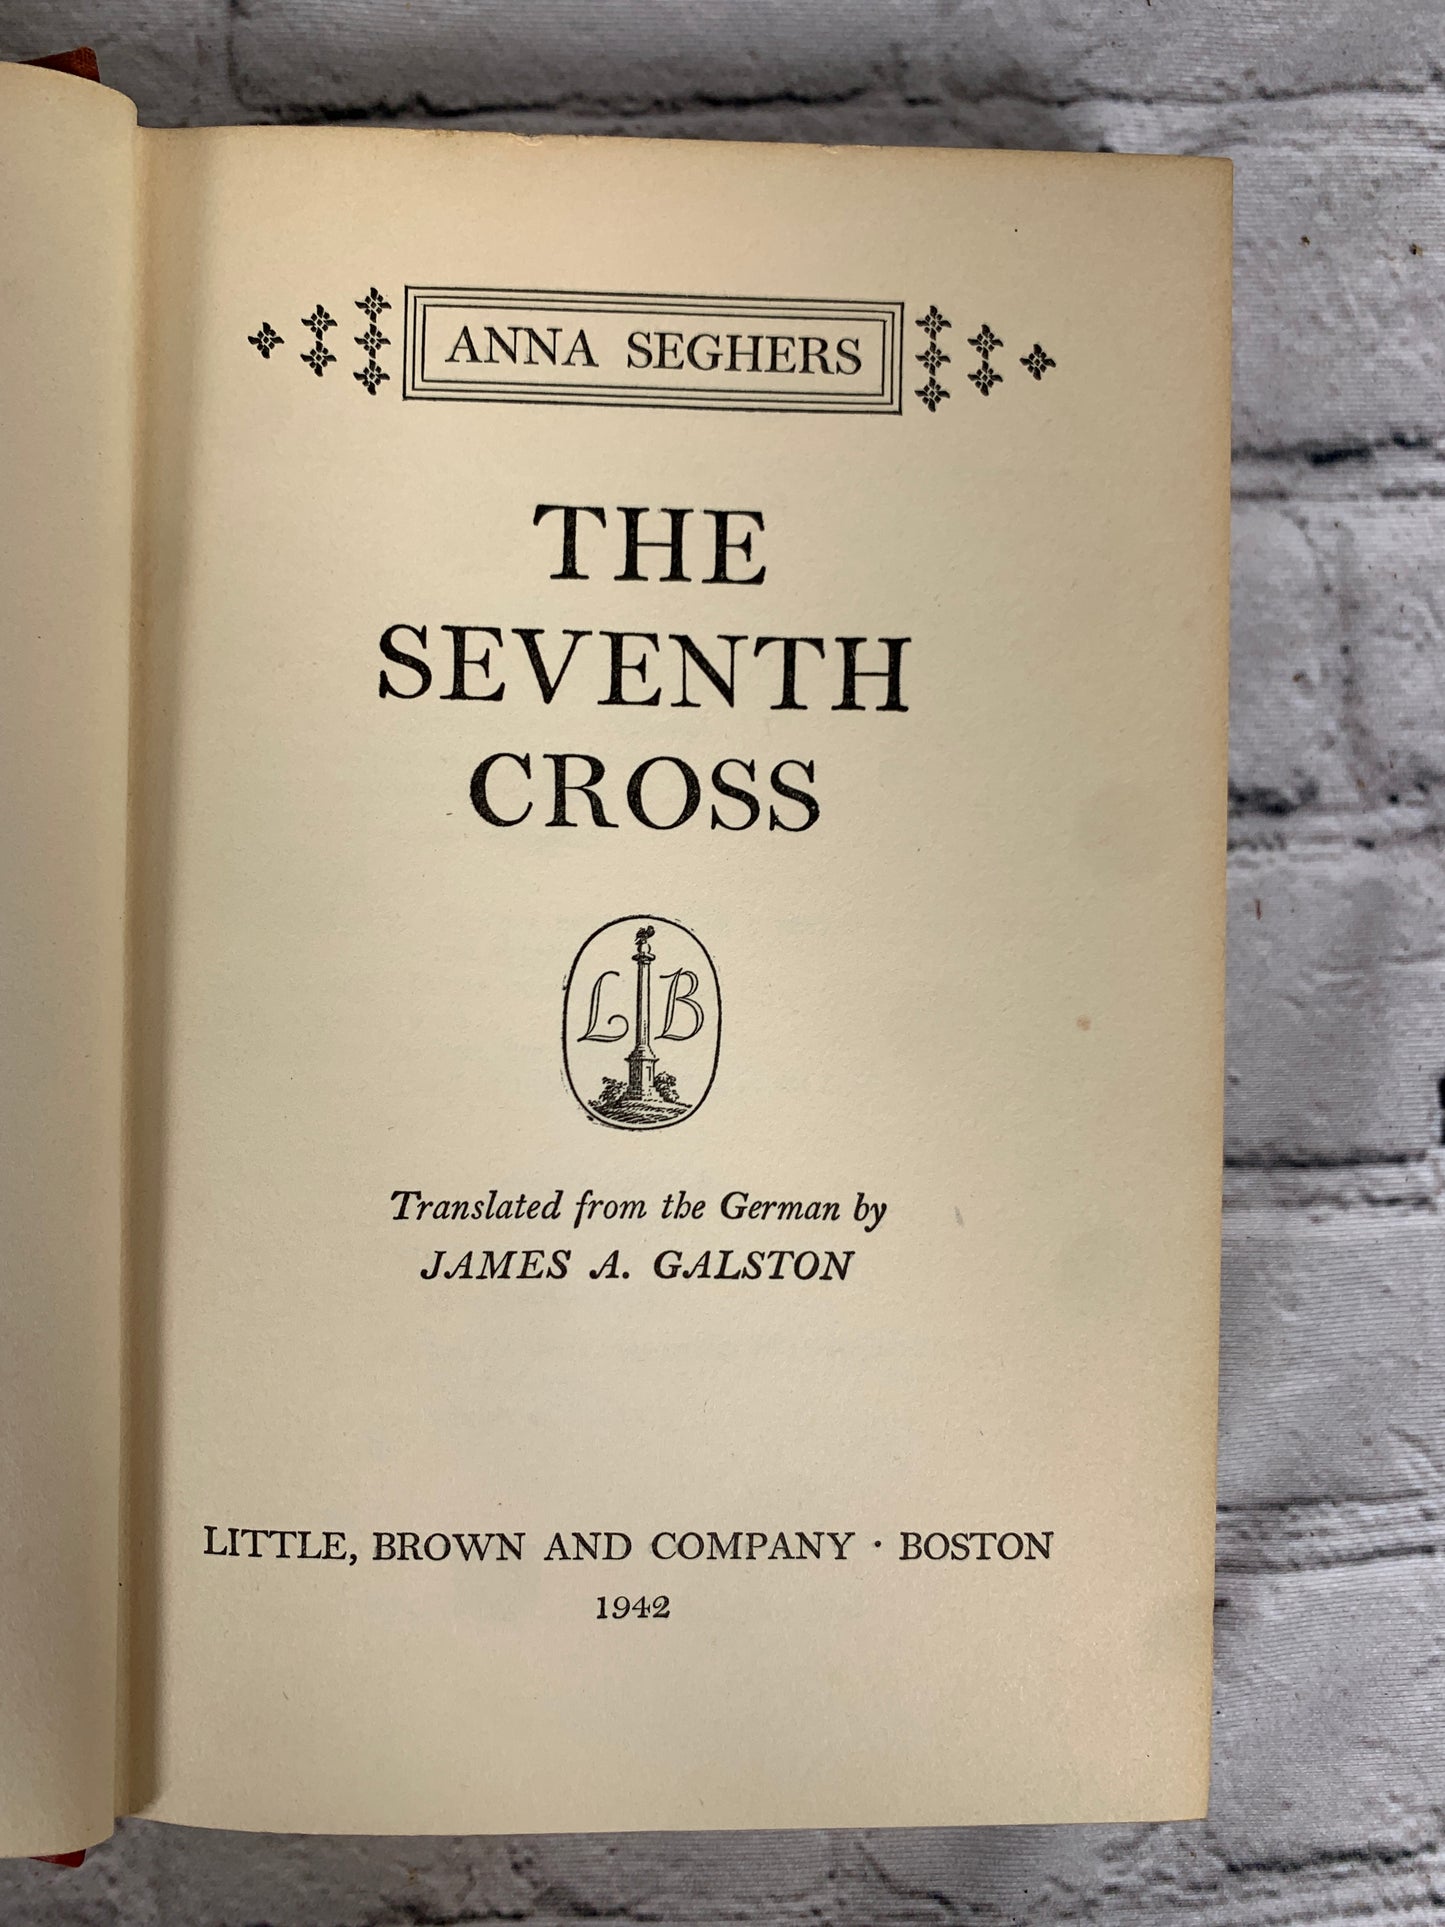 The Seventh Cross by Anna Seghers [1942]